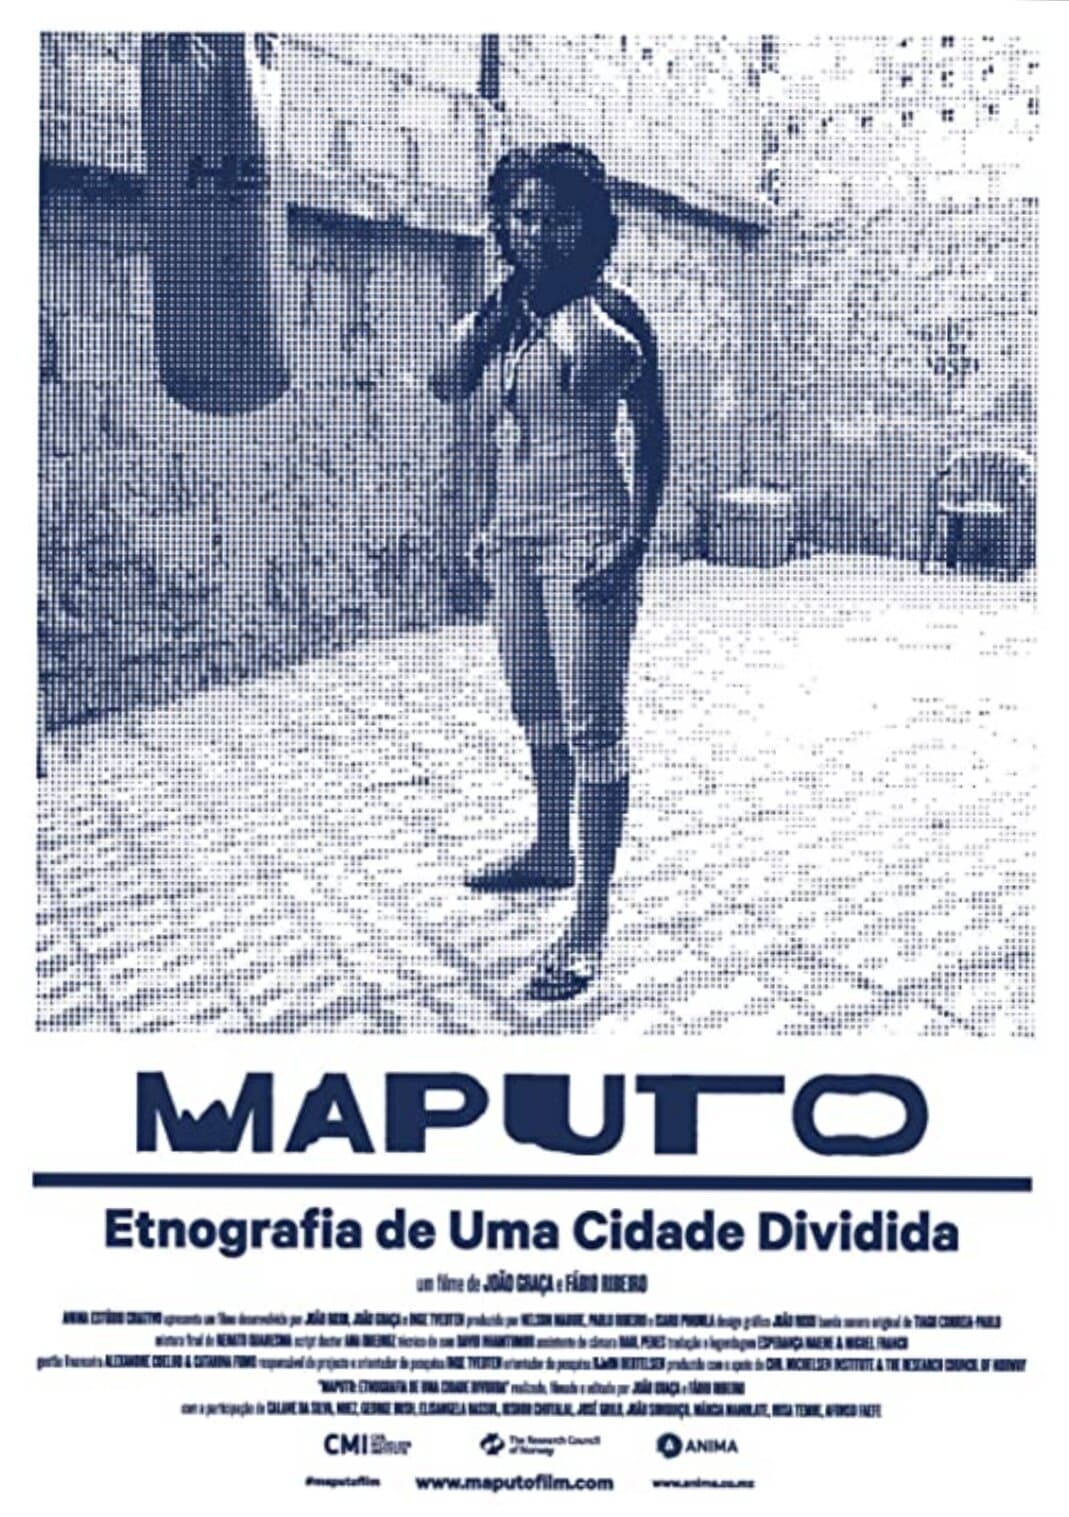 Maputo: Ethnography of a Divided City